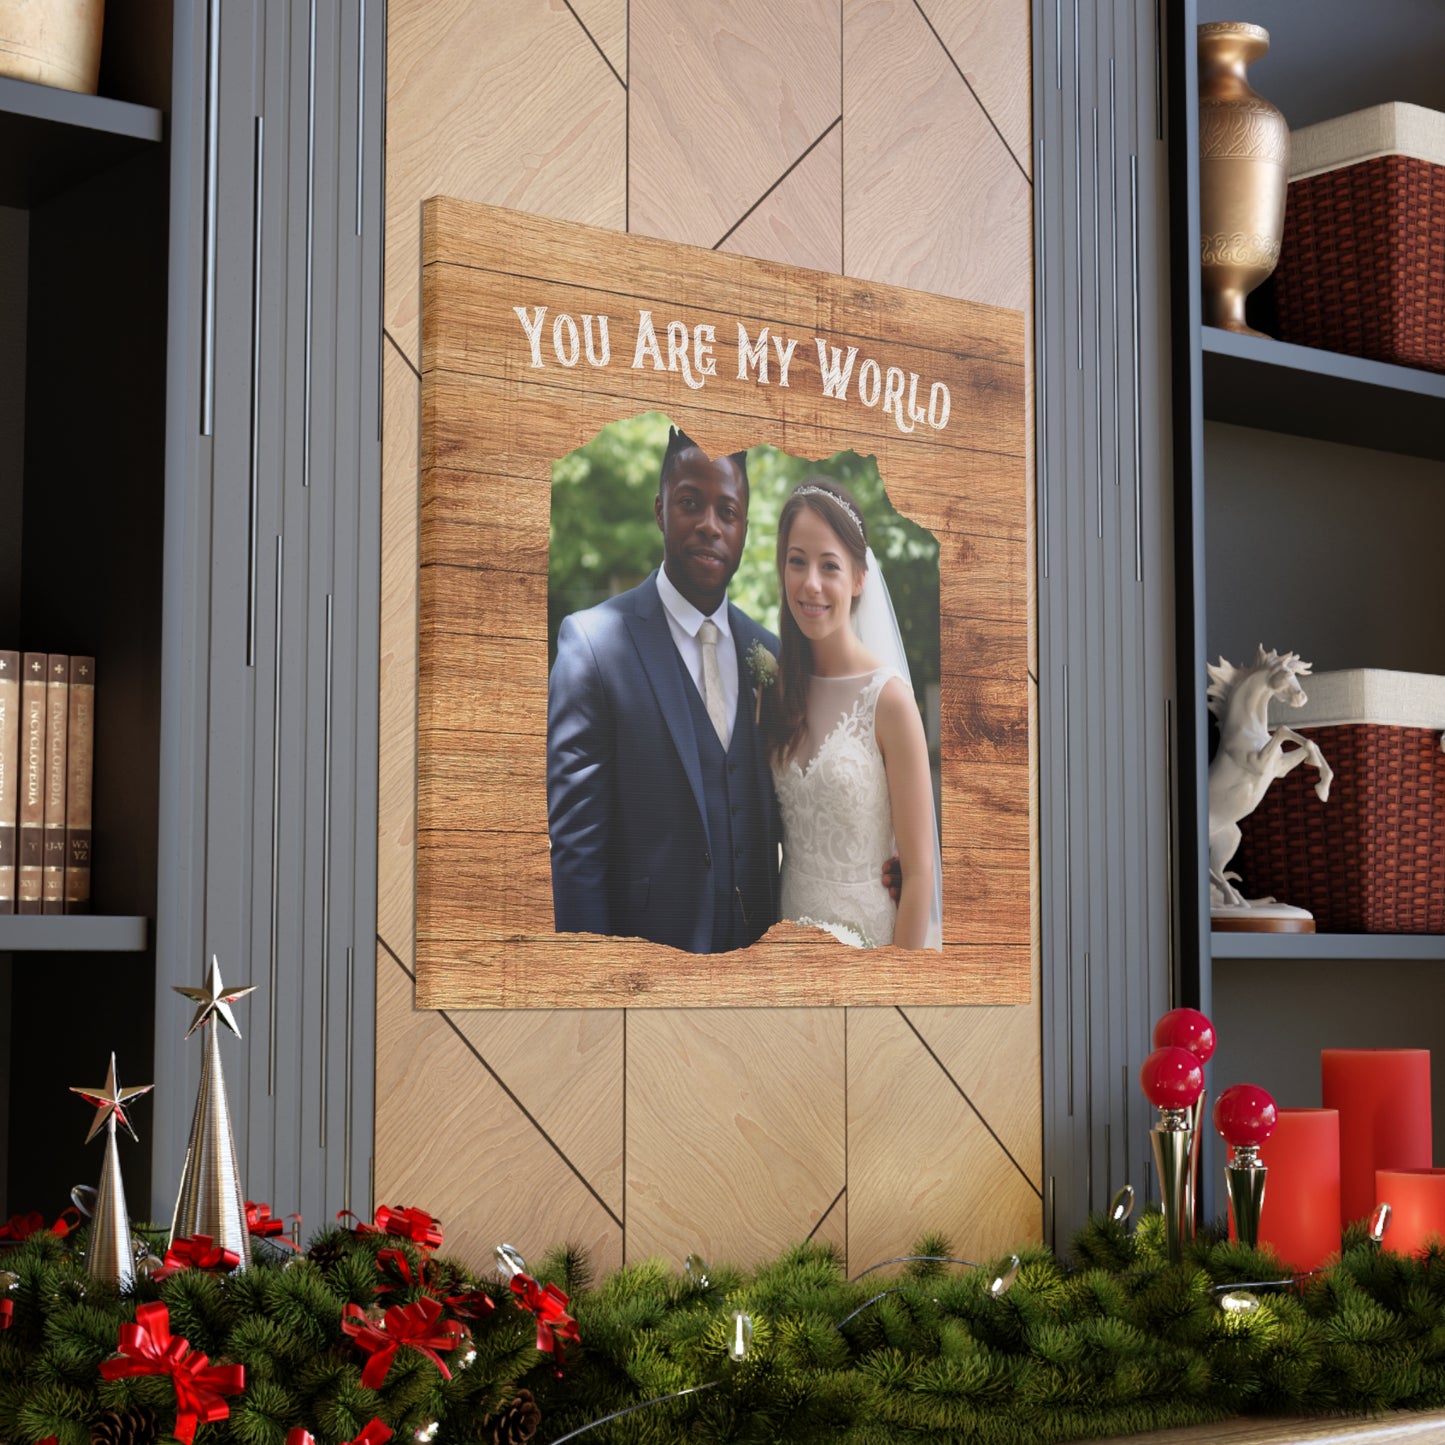 "You Are My World" Custom Photo Wall Art - Weave Got Gifts - Unique Gifts You Won’t Find Anywhere Else!